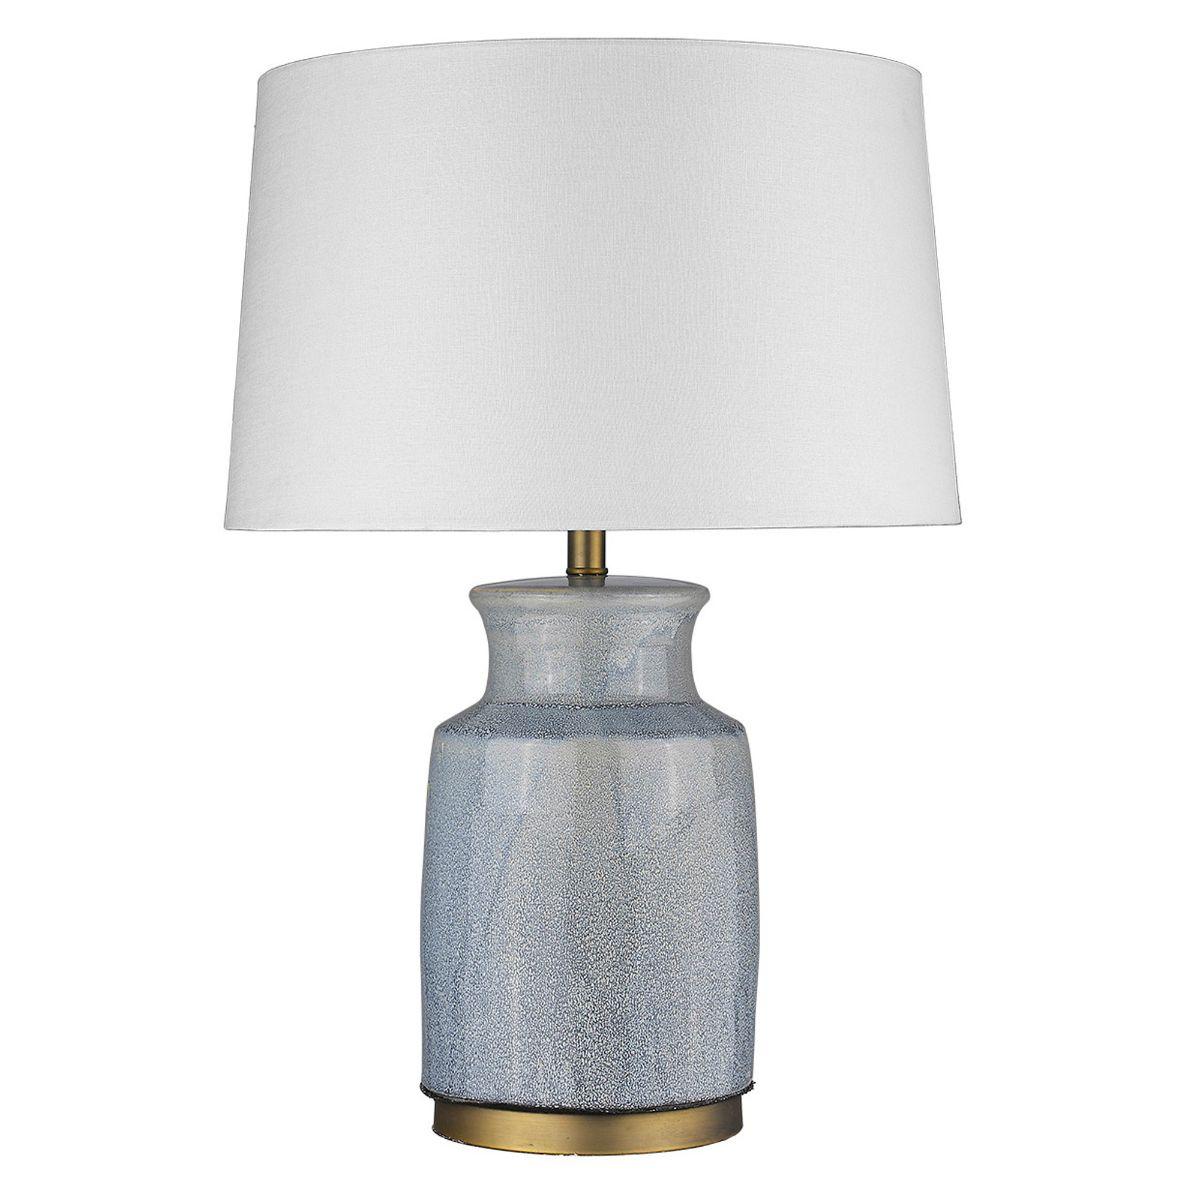 Trend Home 1 Light Table Lamp Silver Mist Ceramic Body and Brass Accents